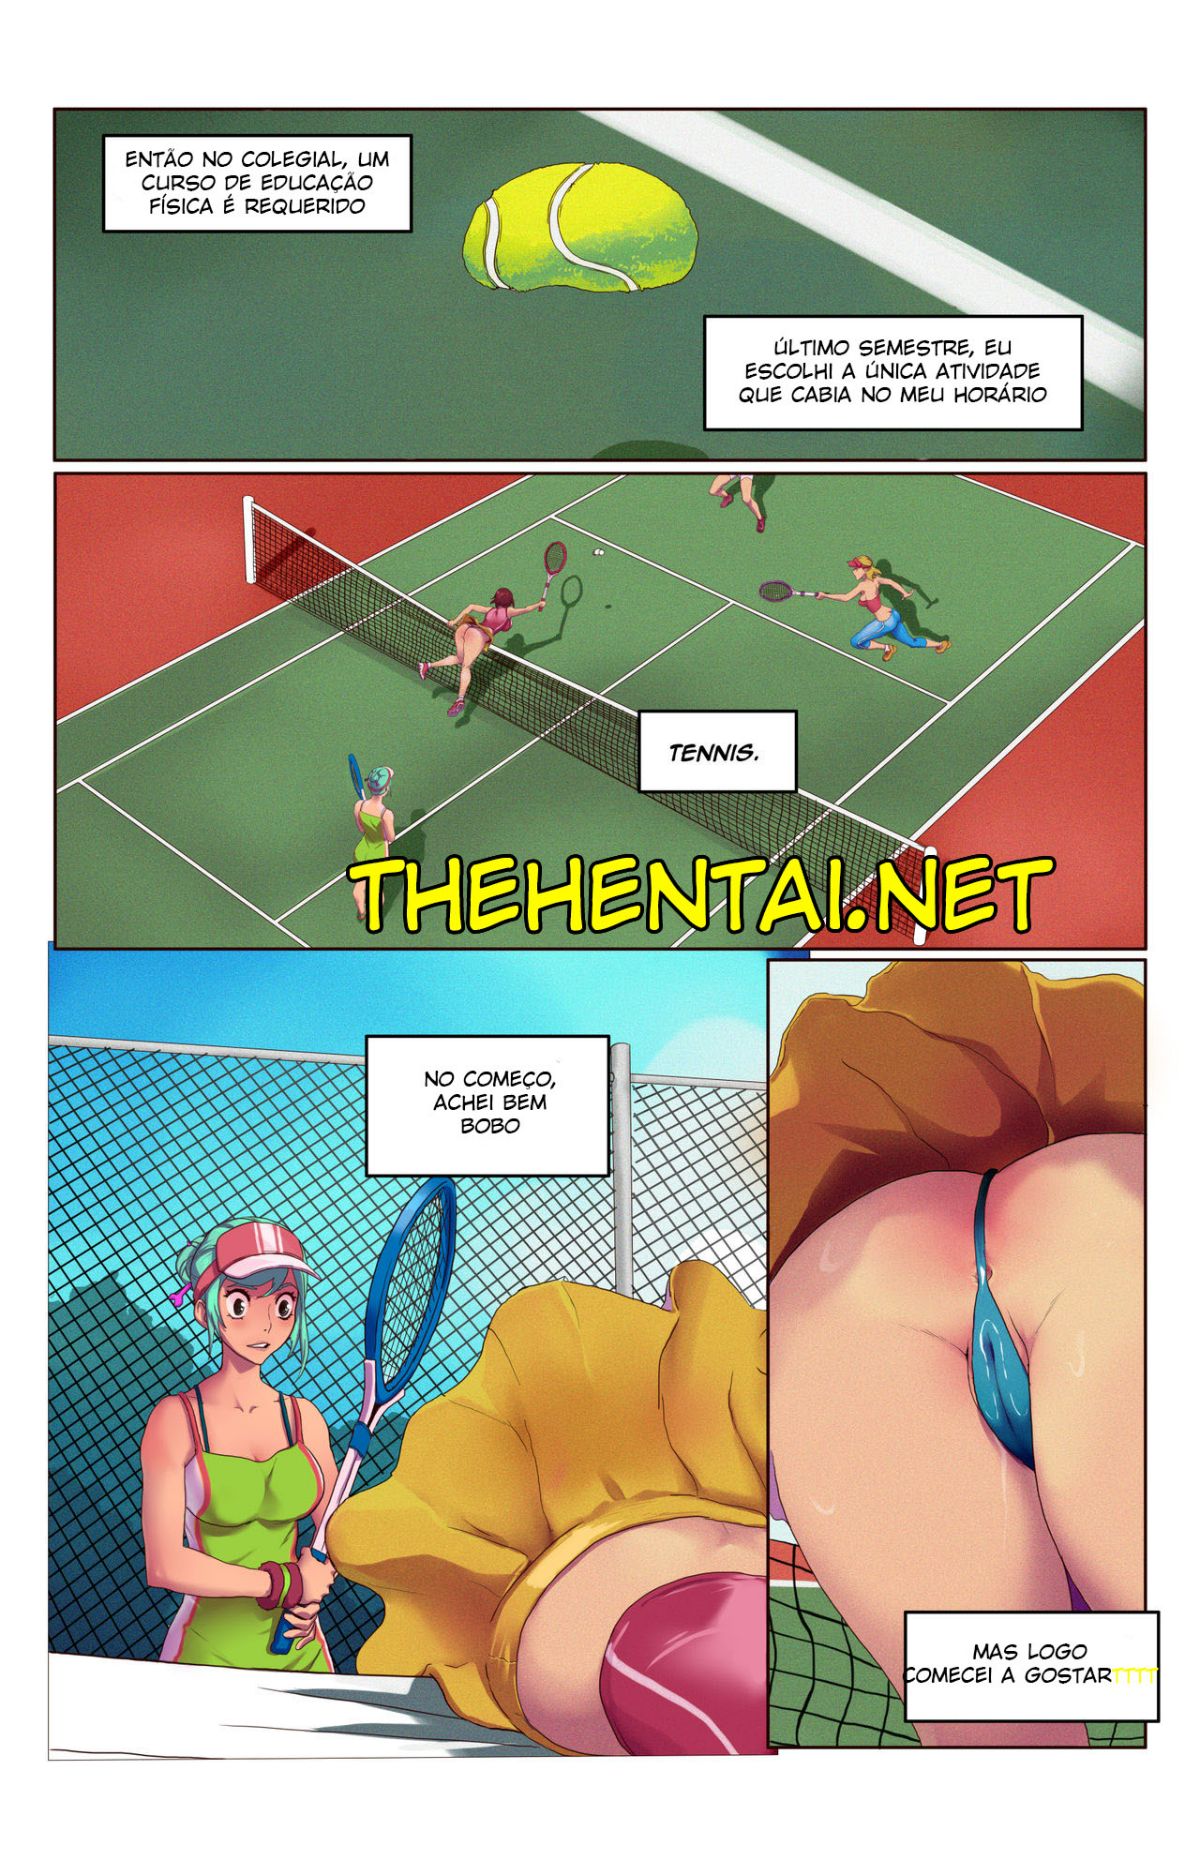 Time Stop and bop - Tennis Hentai pt-br 01